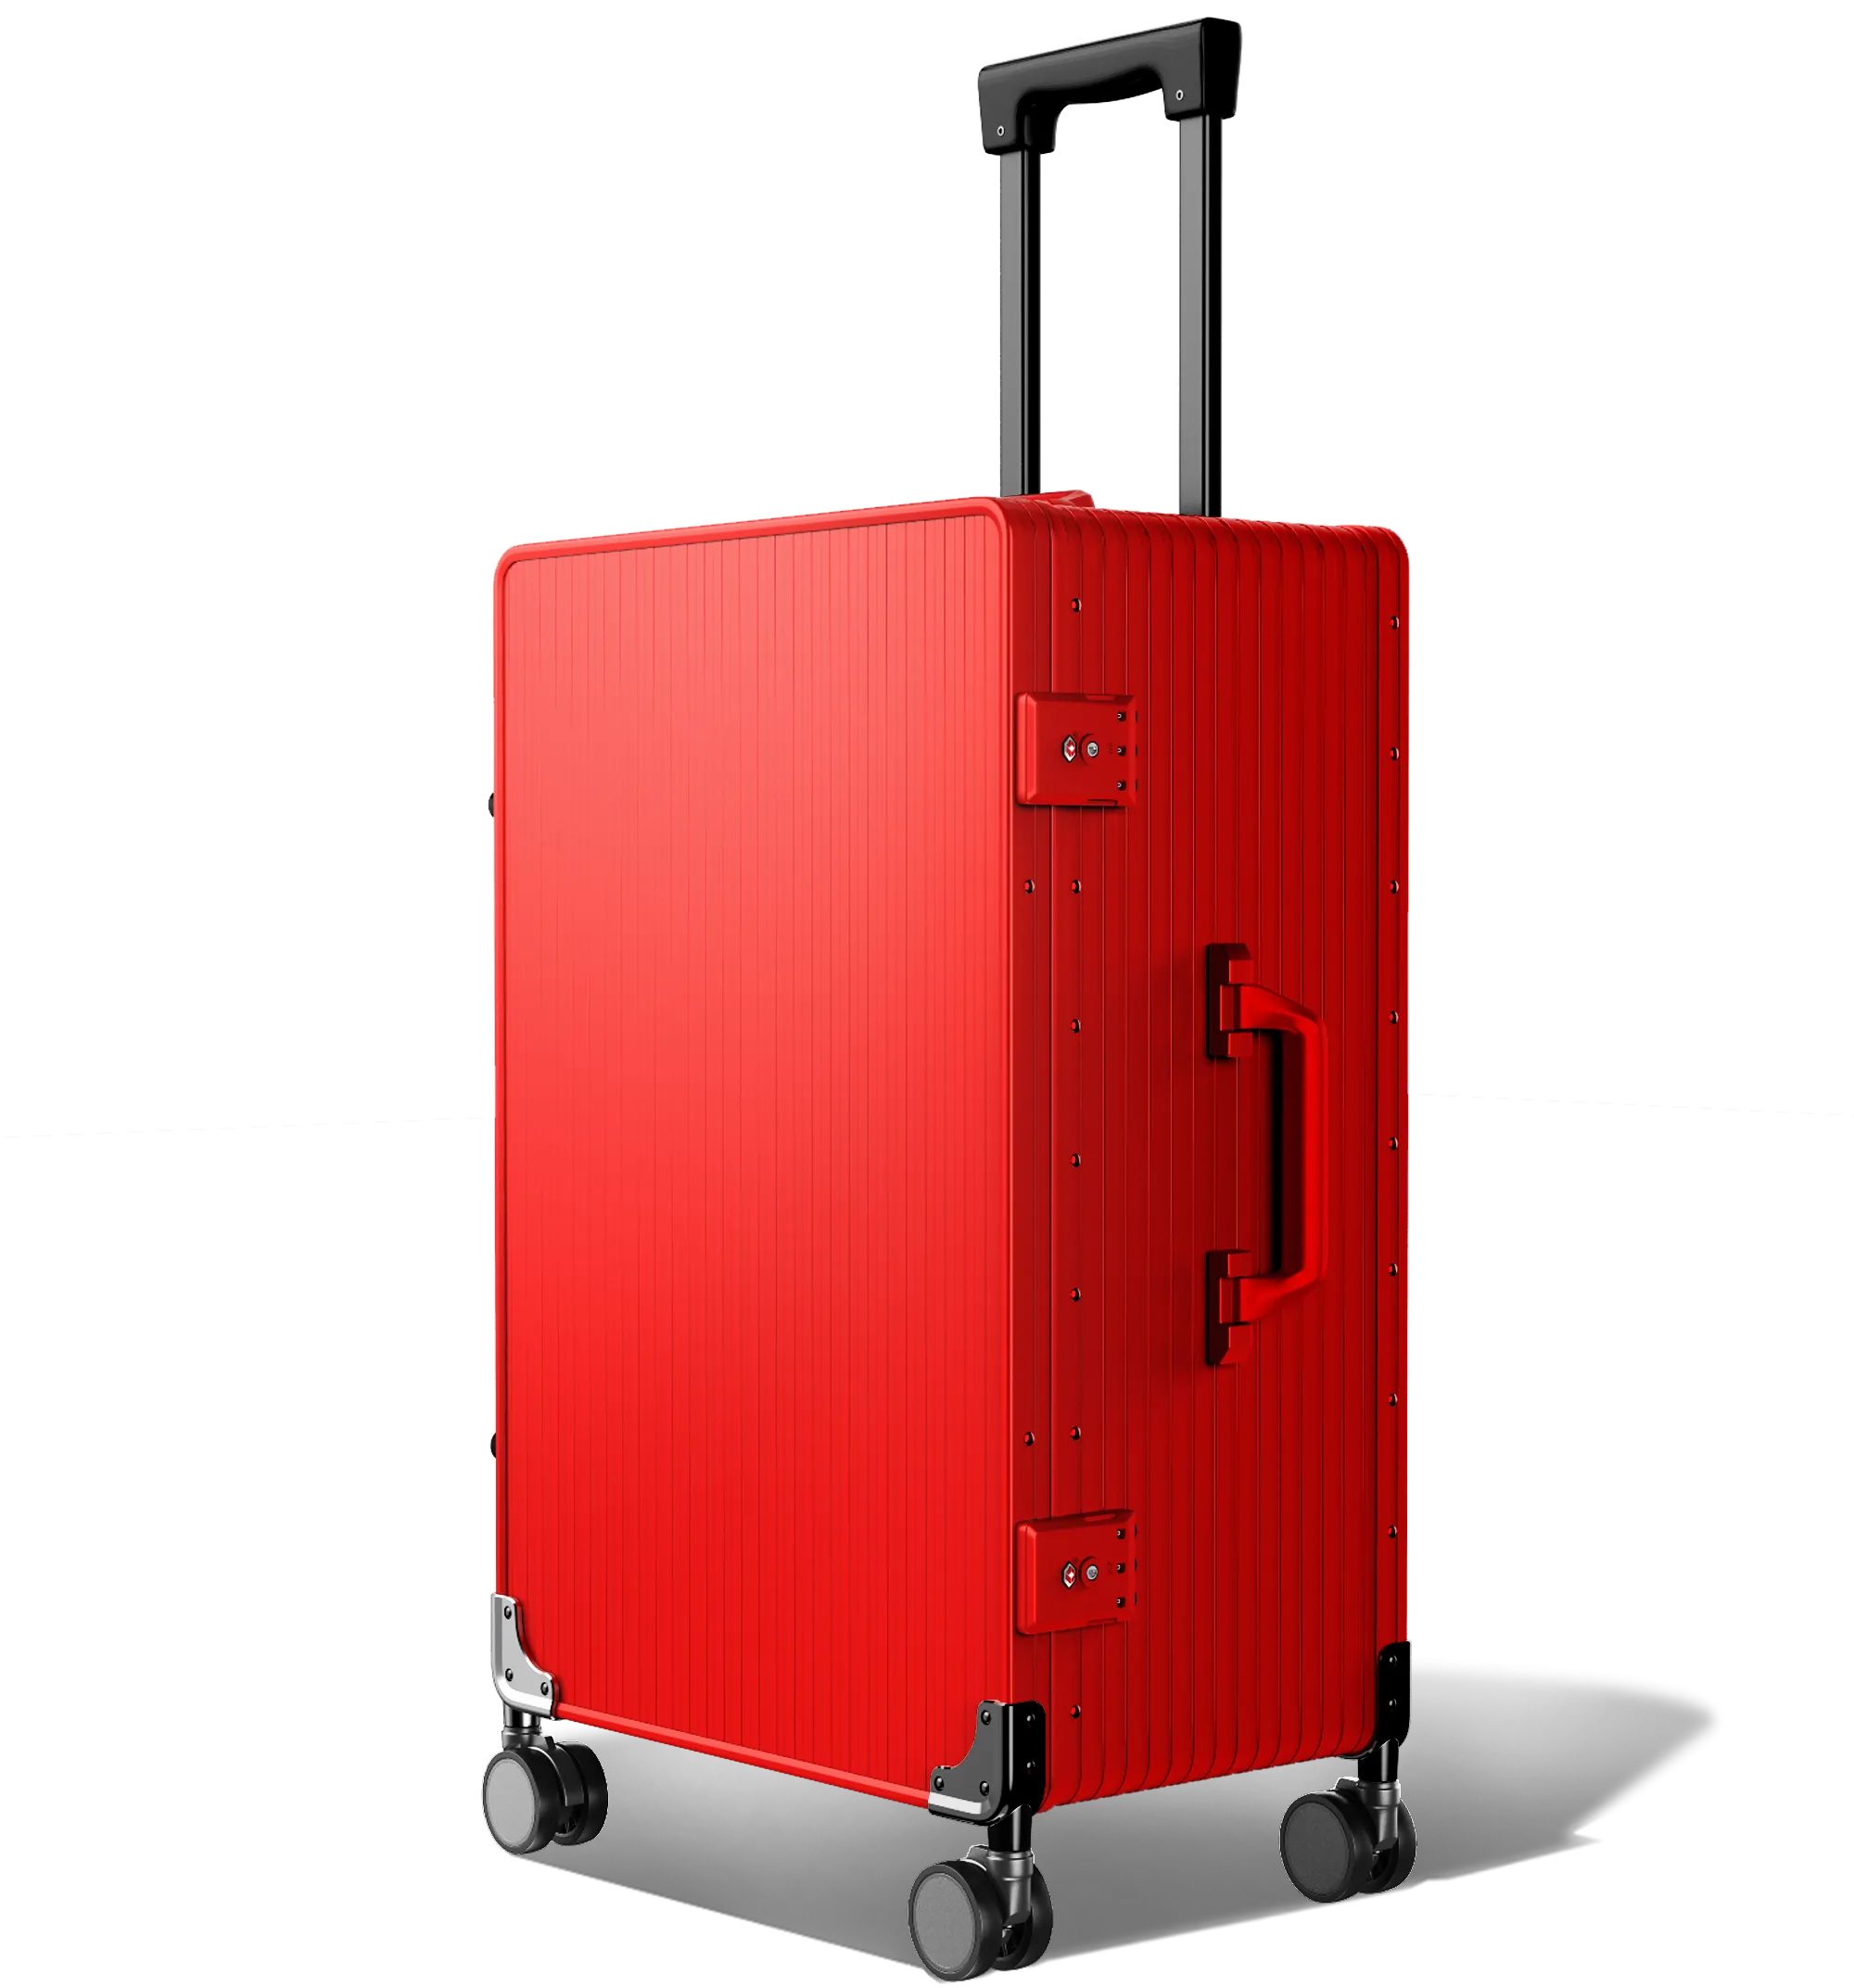 A three-quarter view of an upright Check-In 65/25 red hard-shell aluminium suitcase with a textured surface, featuring an extended telescopic handle, a side handle, and four spinner wheels, set against a white background.